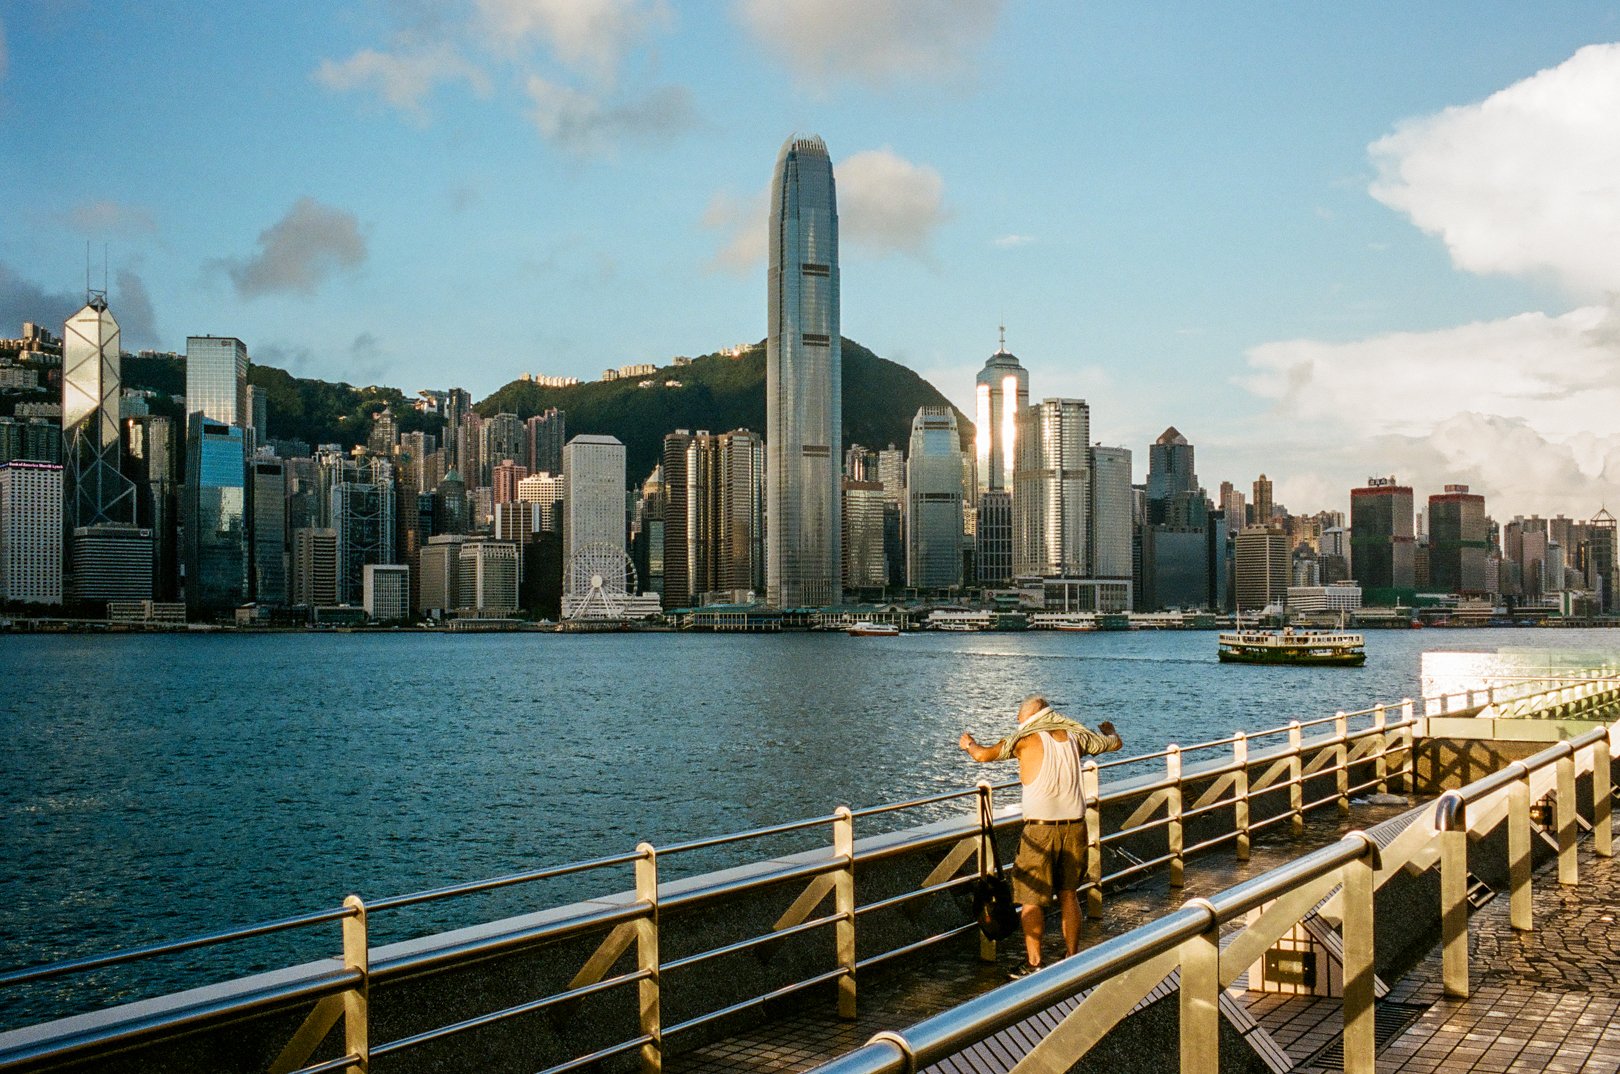 Wong Wei-Him Shares His Connection with Hong Kong's Iconic Harbor